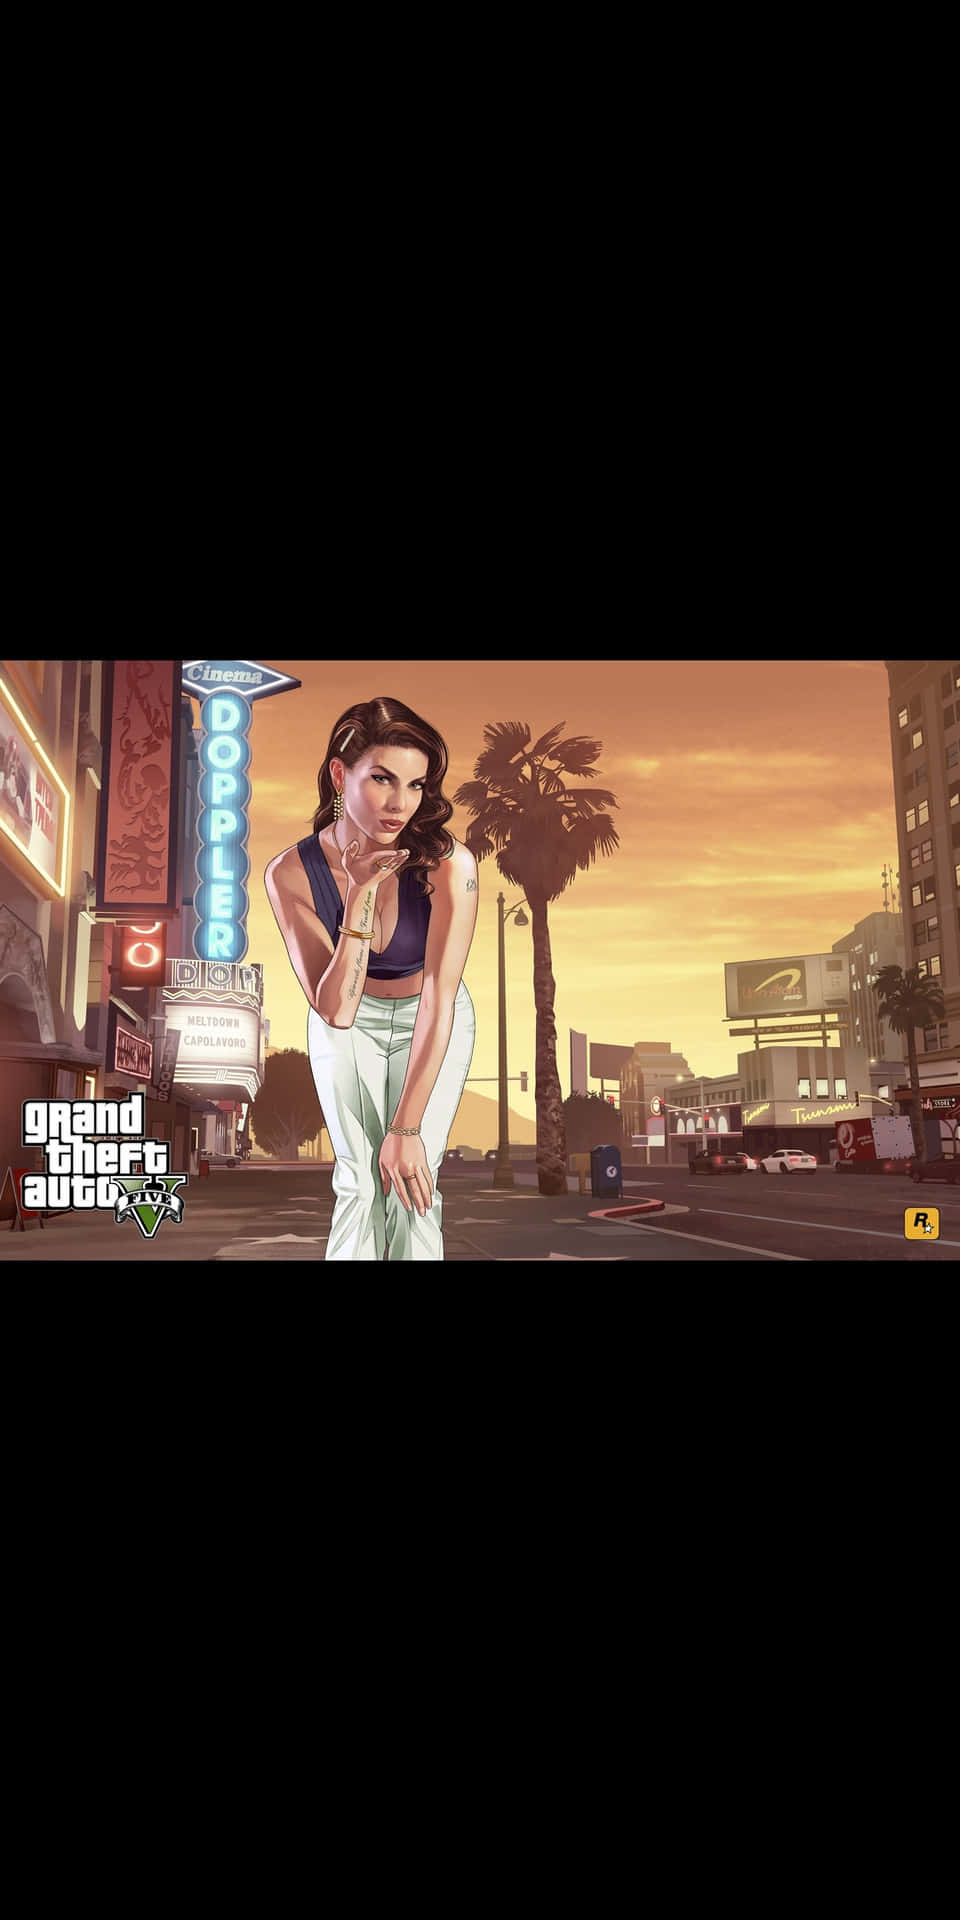 Dynamic Pixel 3 Display Highlighting Grand Theft Auto V Interactive Game World